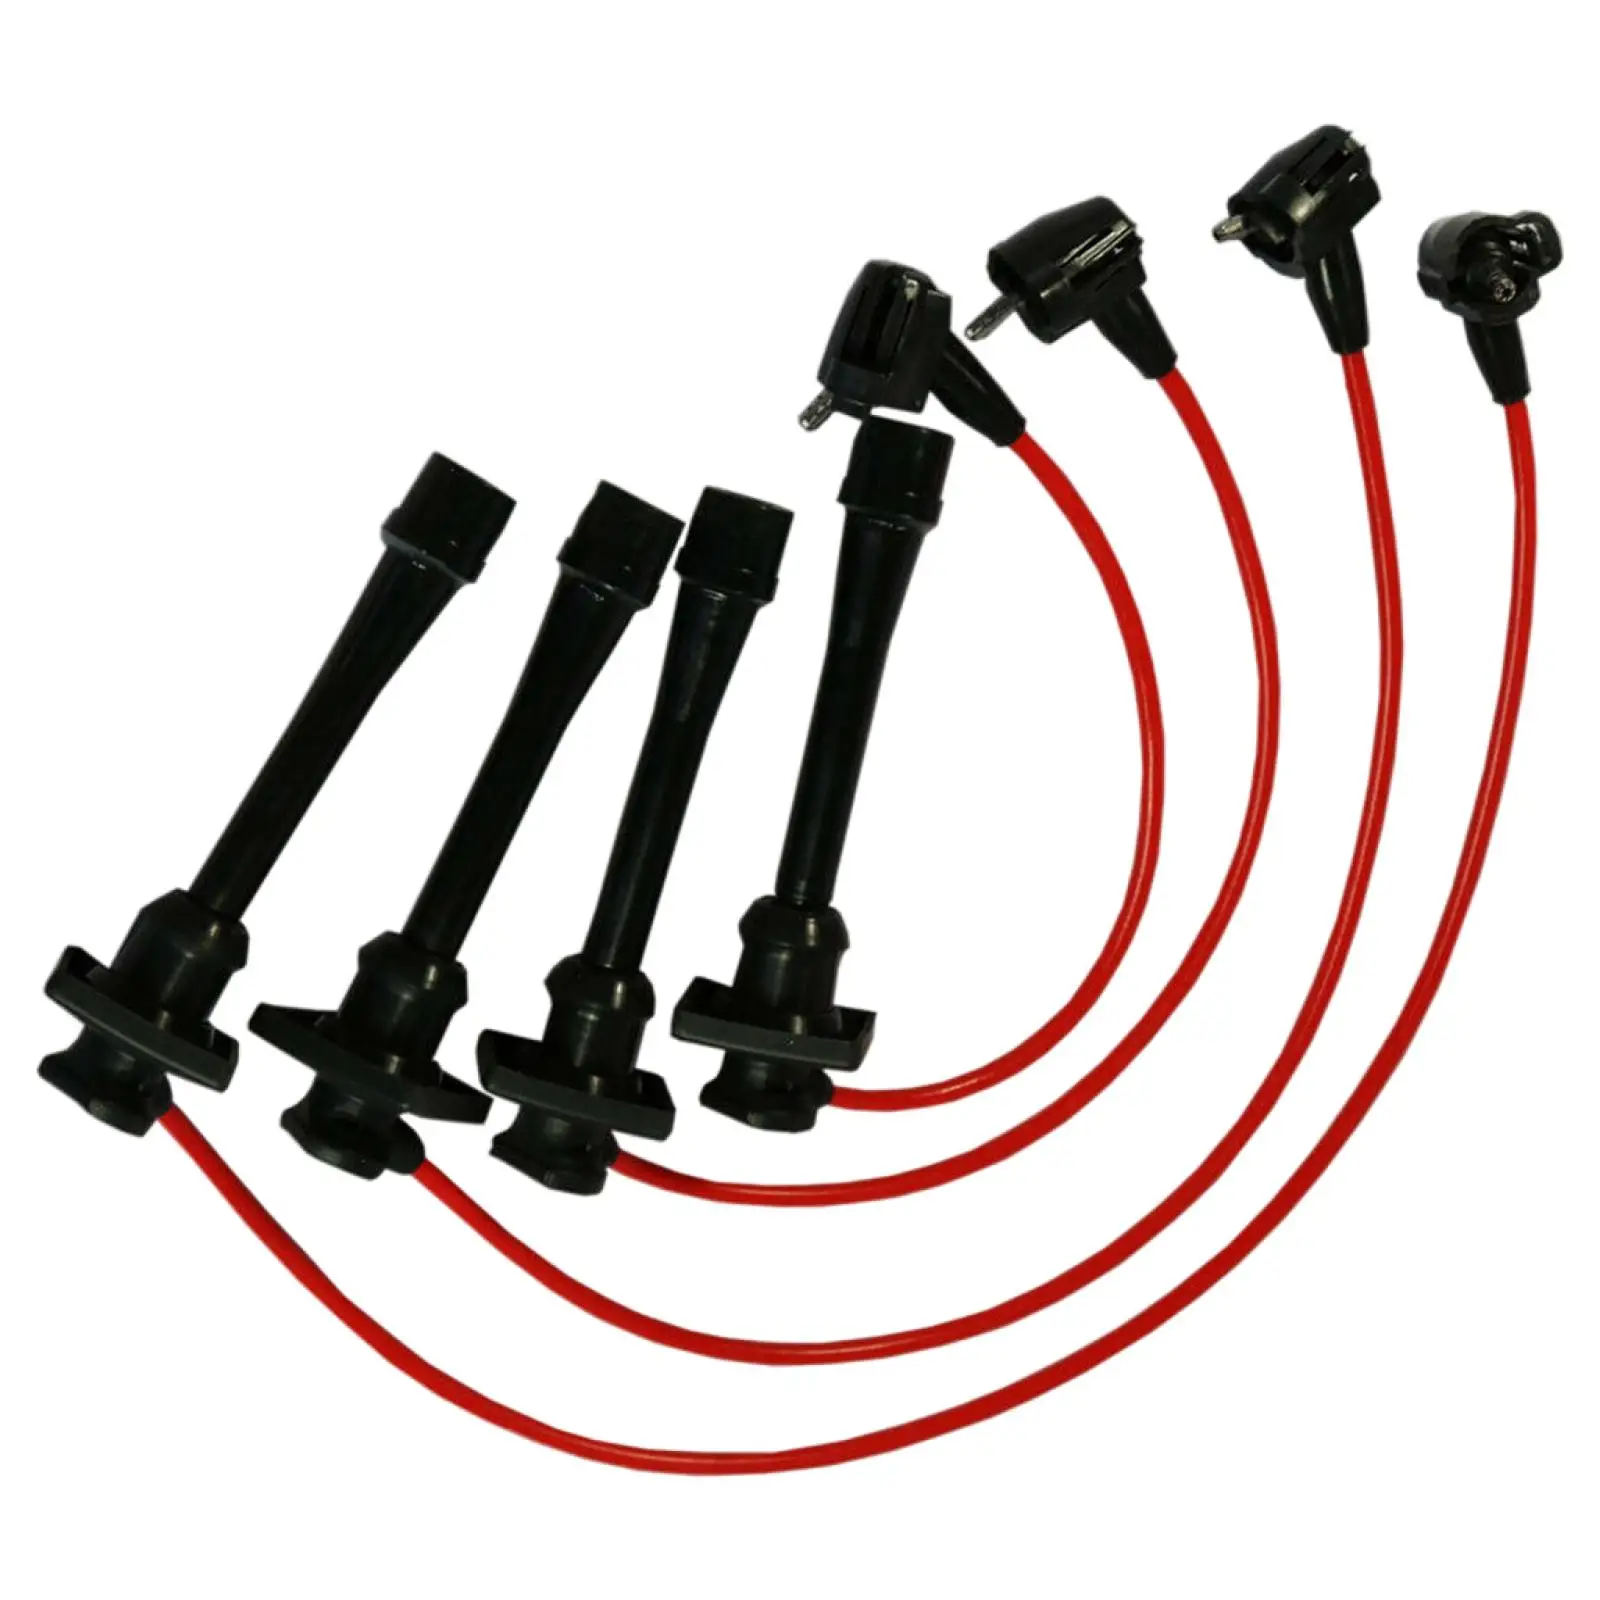 4Pcs Spark Plug Wires Set 90919-22327 Silicone Ignition Cable for toyota 1993 1994 1995 1996 1997 1.8L 93-97